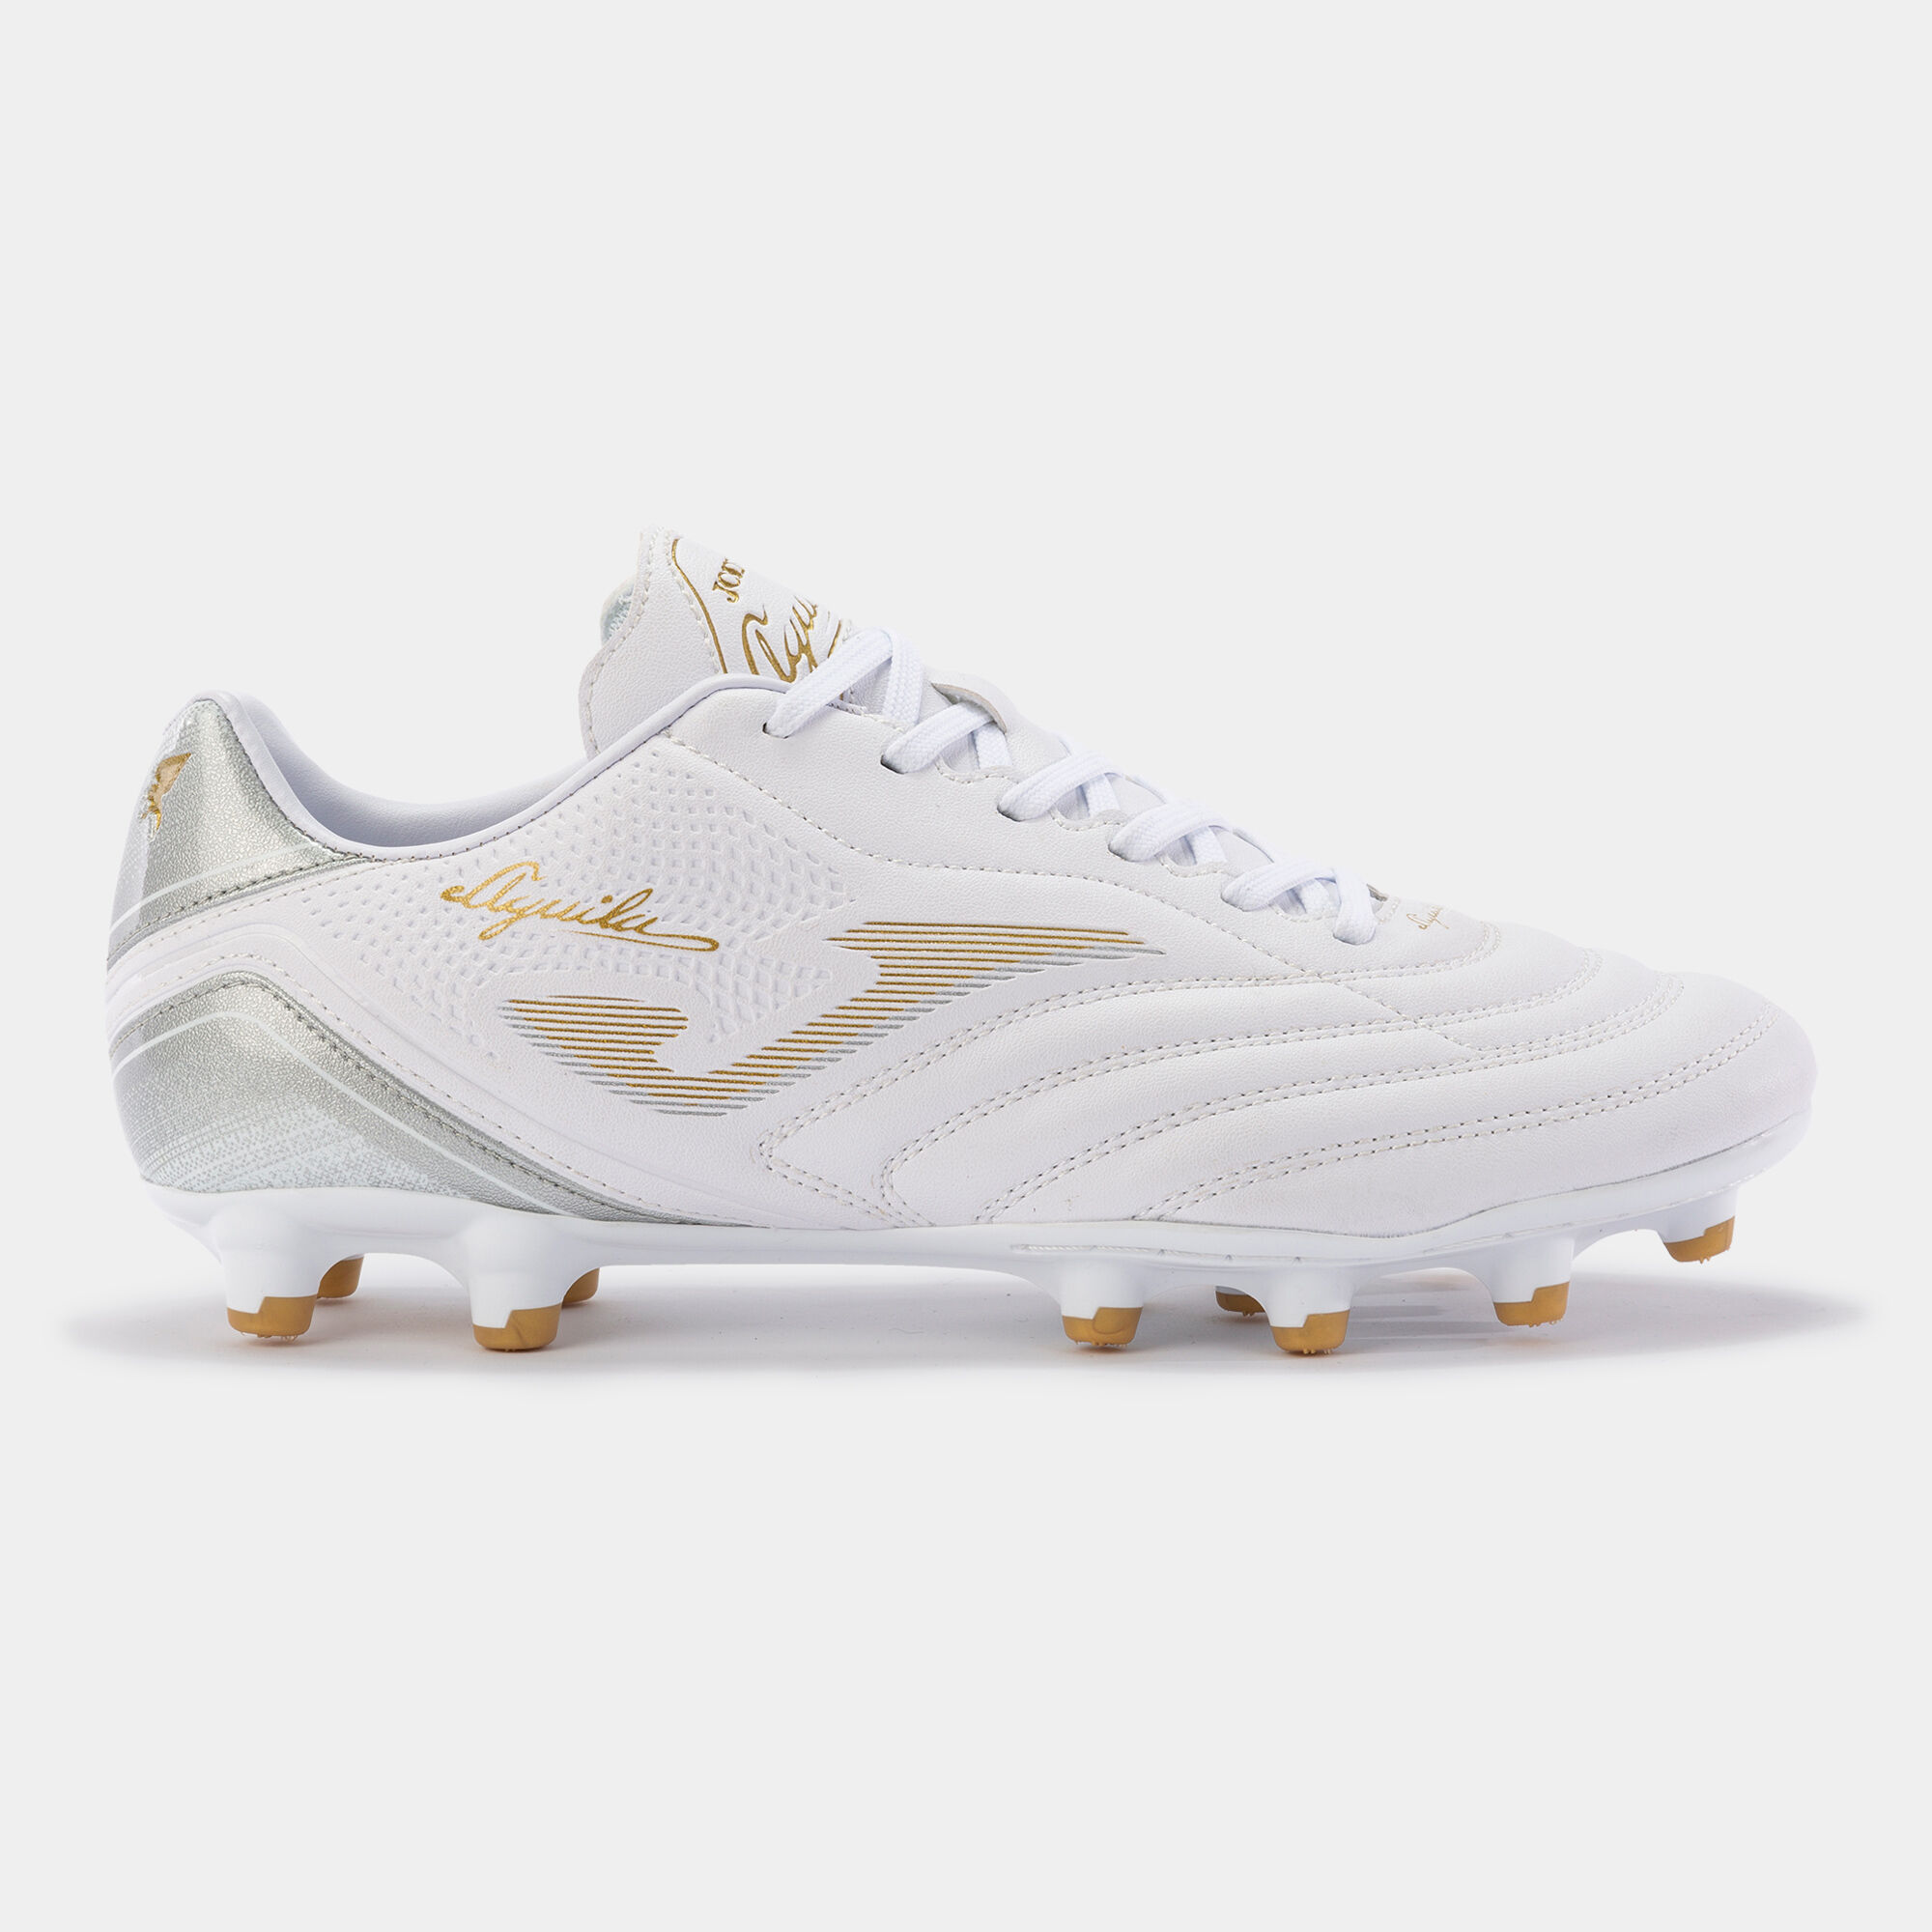 FOOTBALL BOOTS AGUILA 22 FIRM GROUND FG WHITE